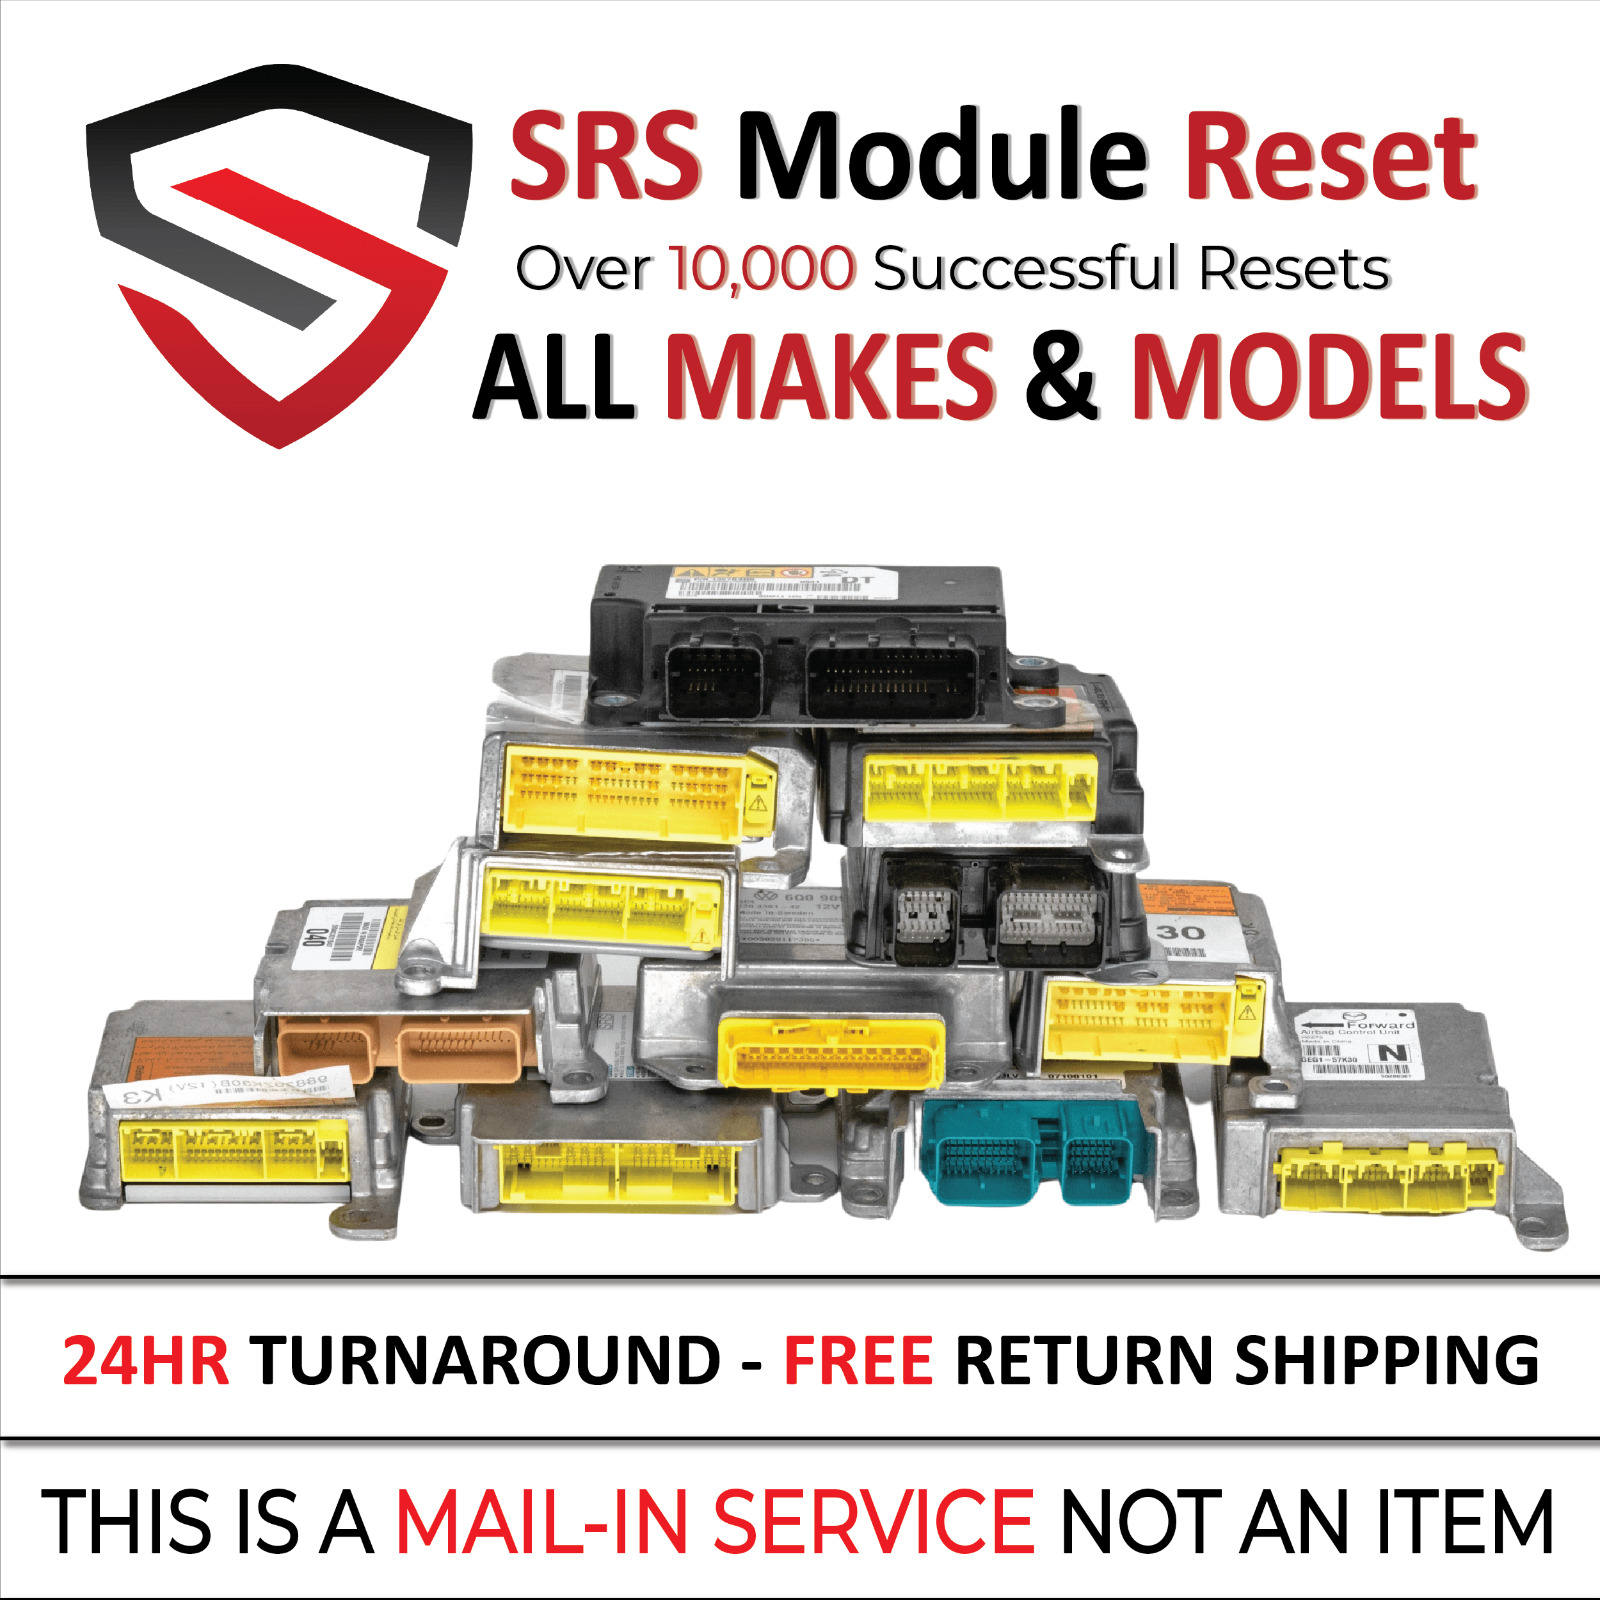 For Jeep SRS Module Reset Service - Guaranteed or Your Money Back